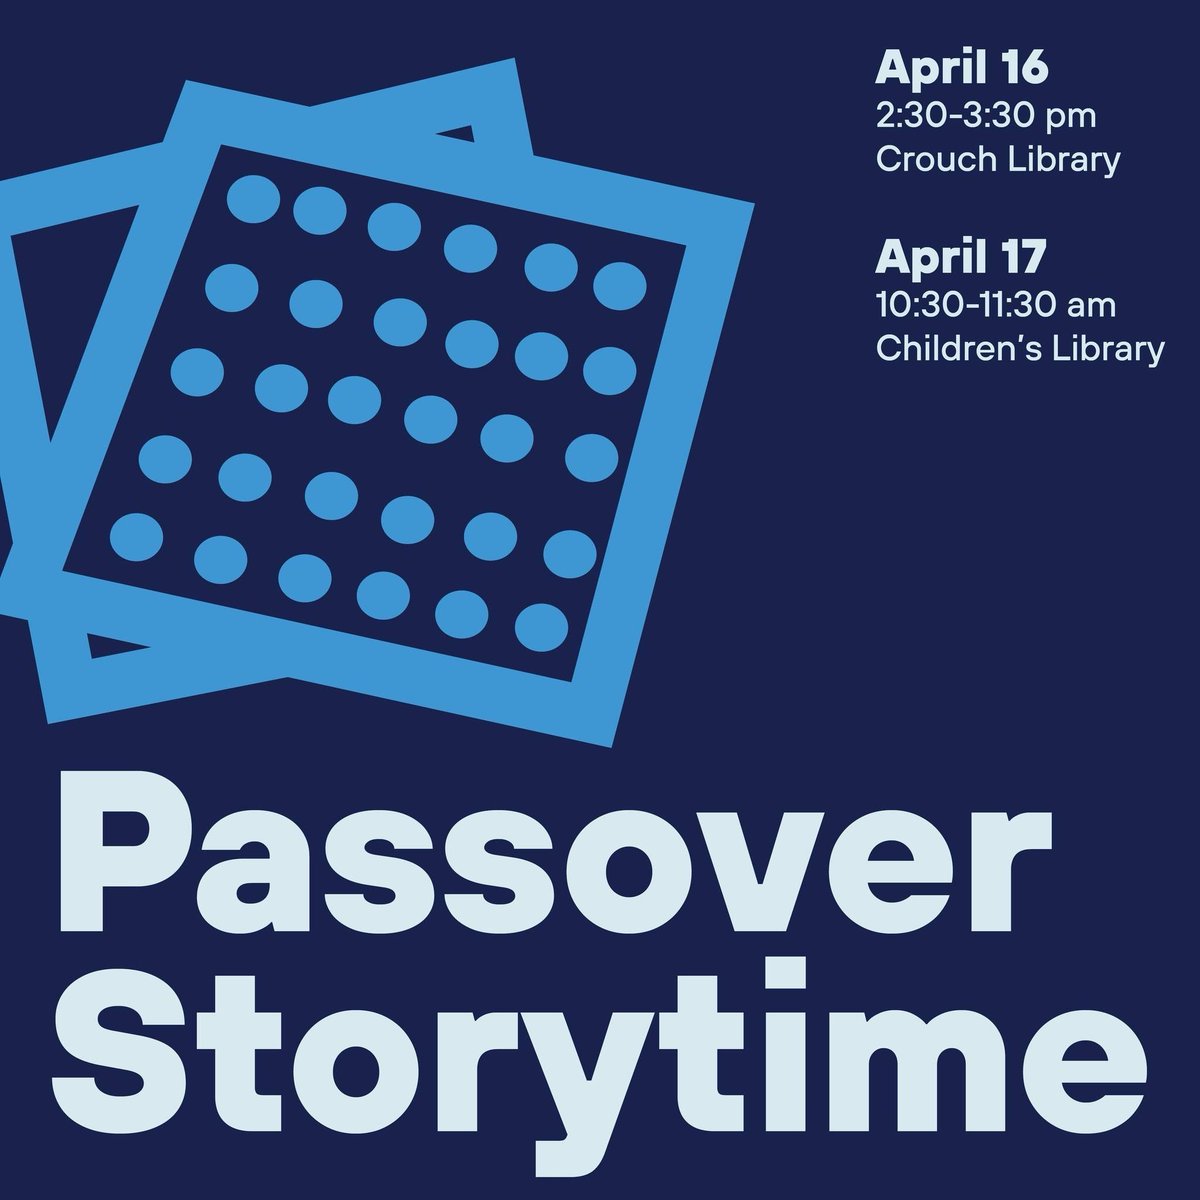 Join us for Passover Storytimes today at 2:30pm at Crouch Library and tomorrow at 10:30am at the Children’s Library. 🌼 These storytimes are for children ages 0-6 with a caregiver.